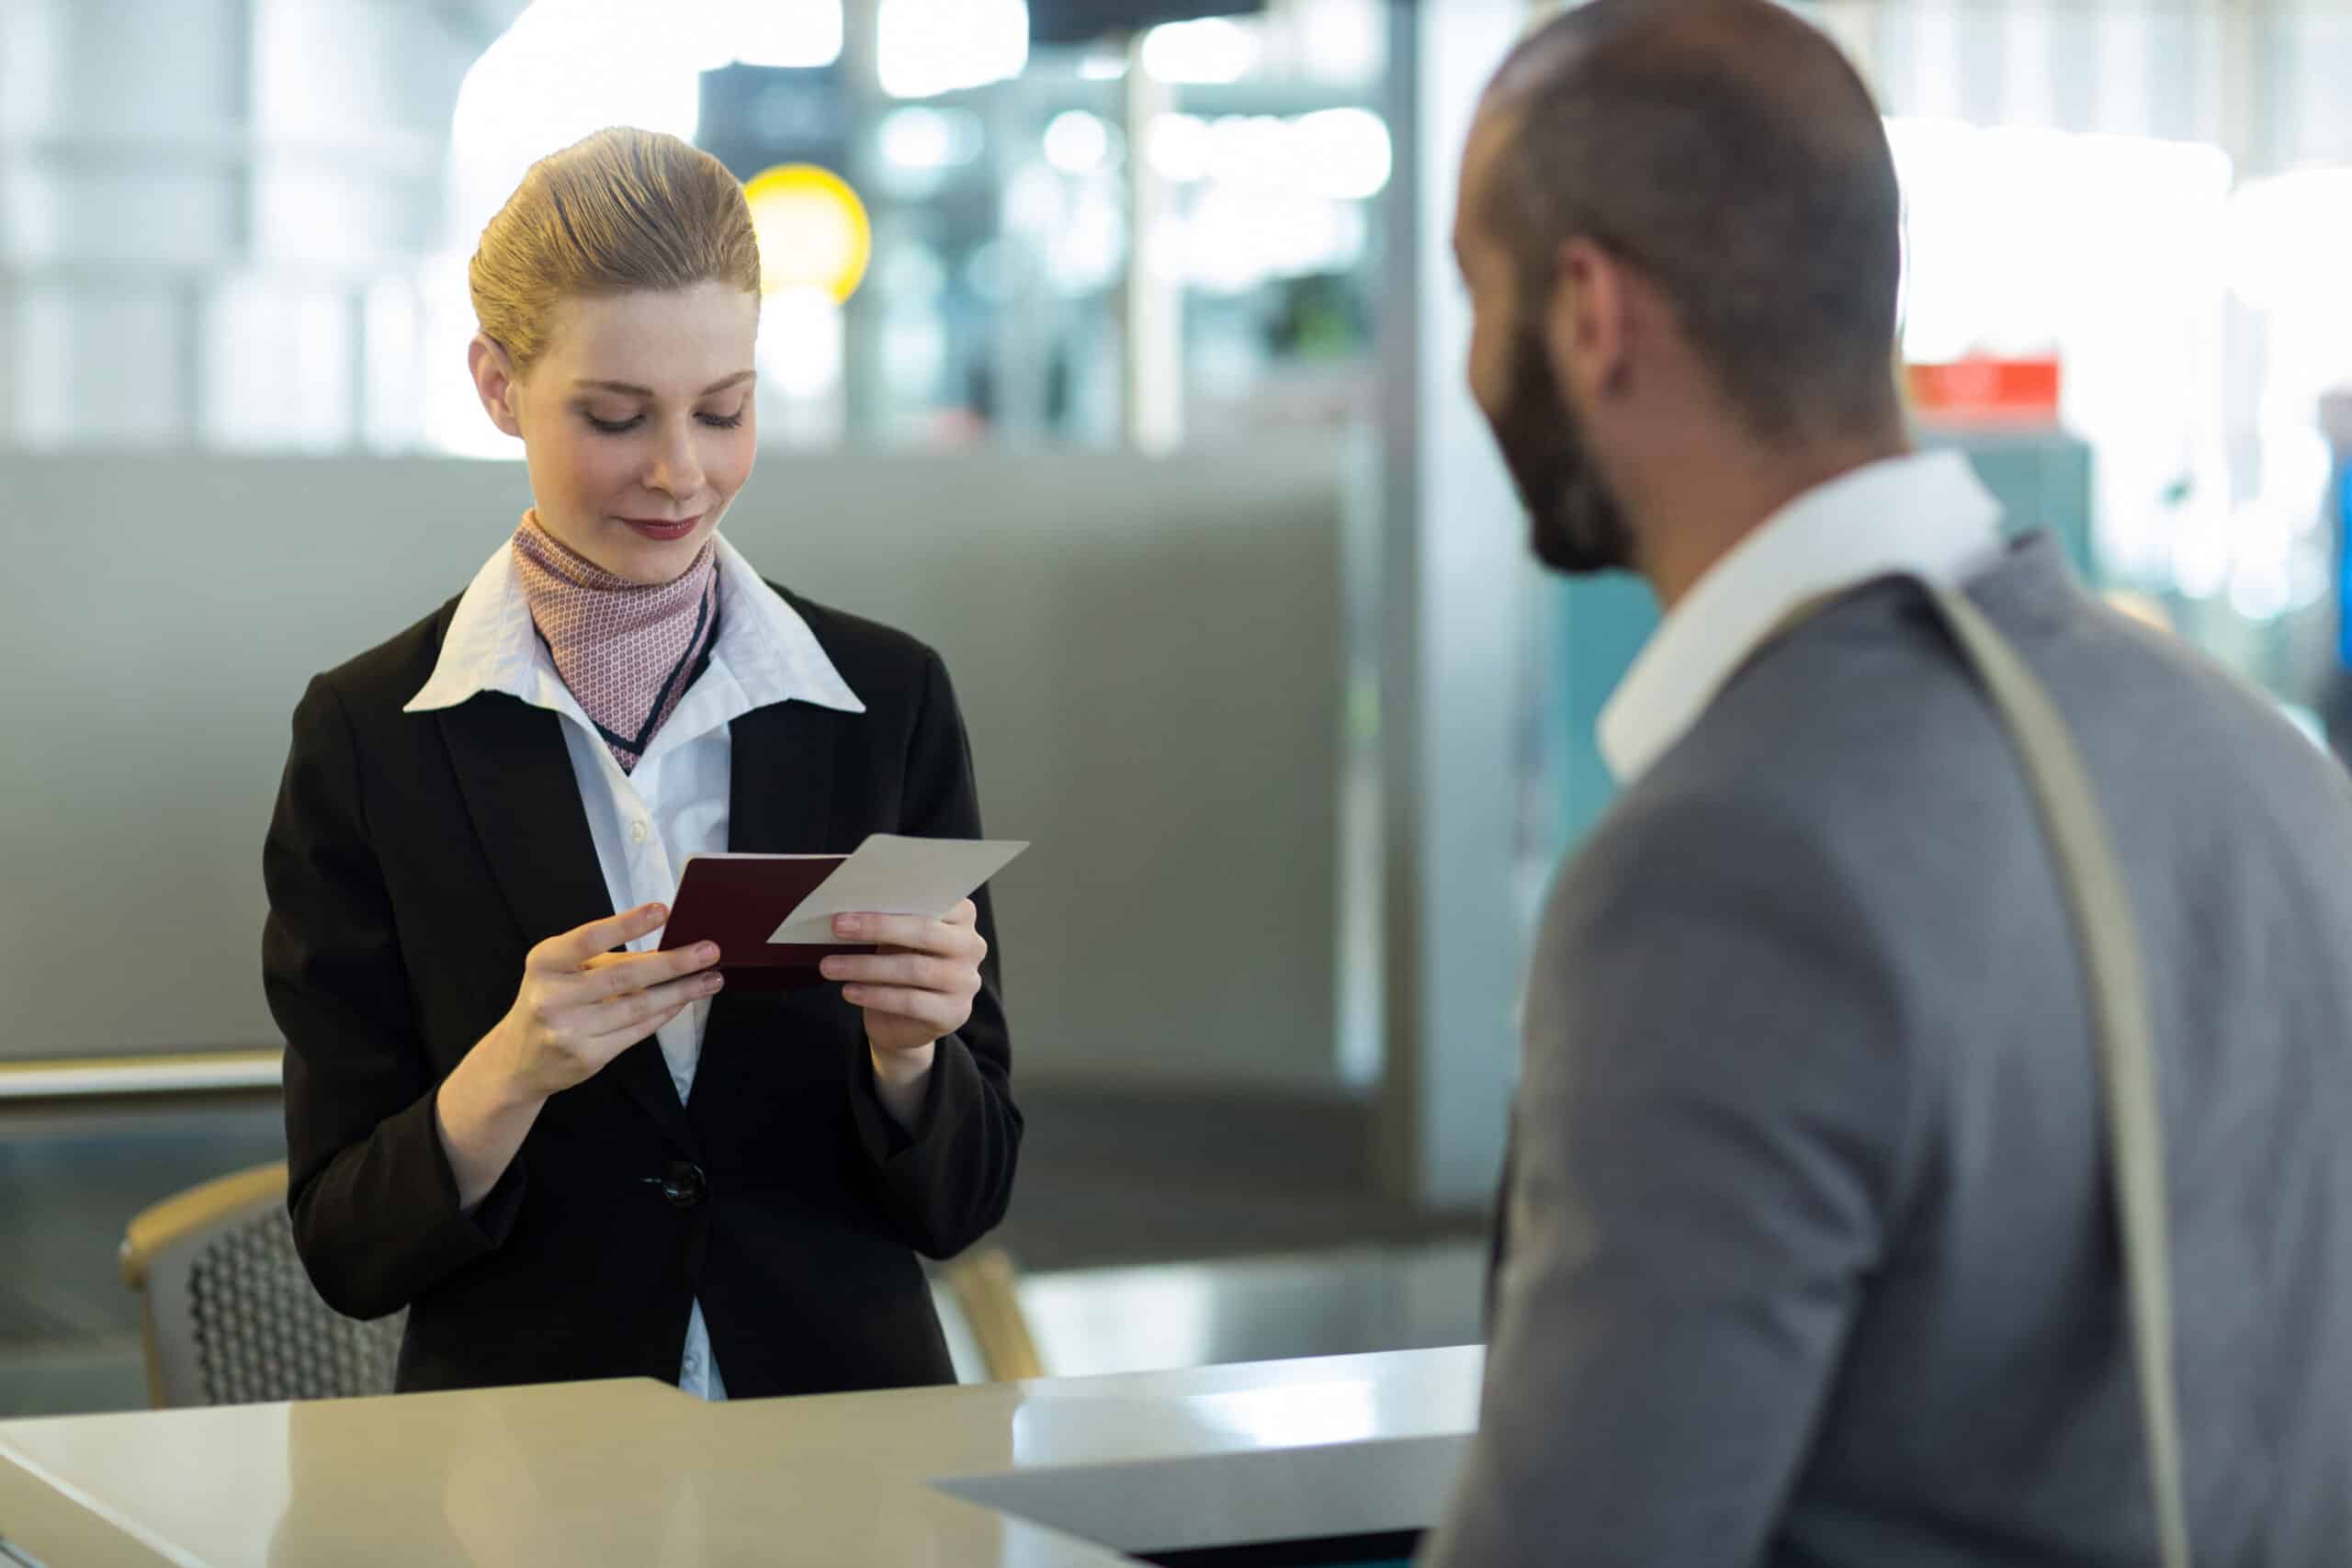 What are the Basic Criteria for Selecting an Airport Consultant?